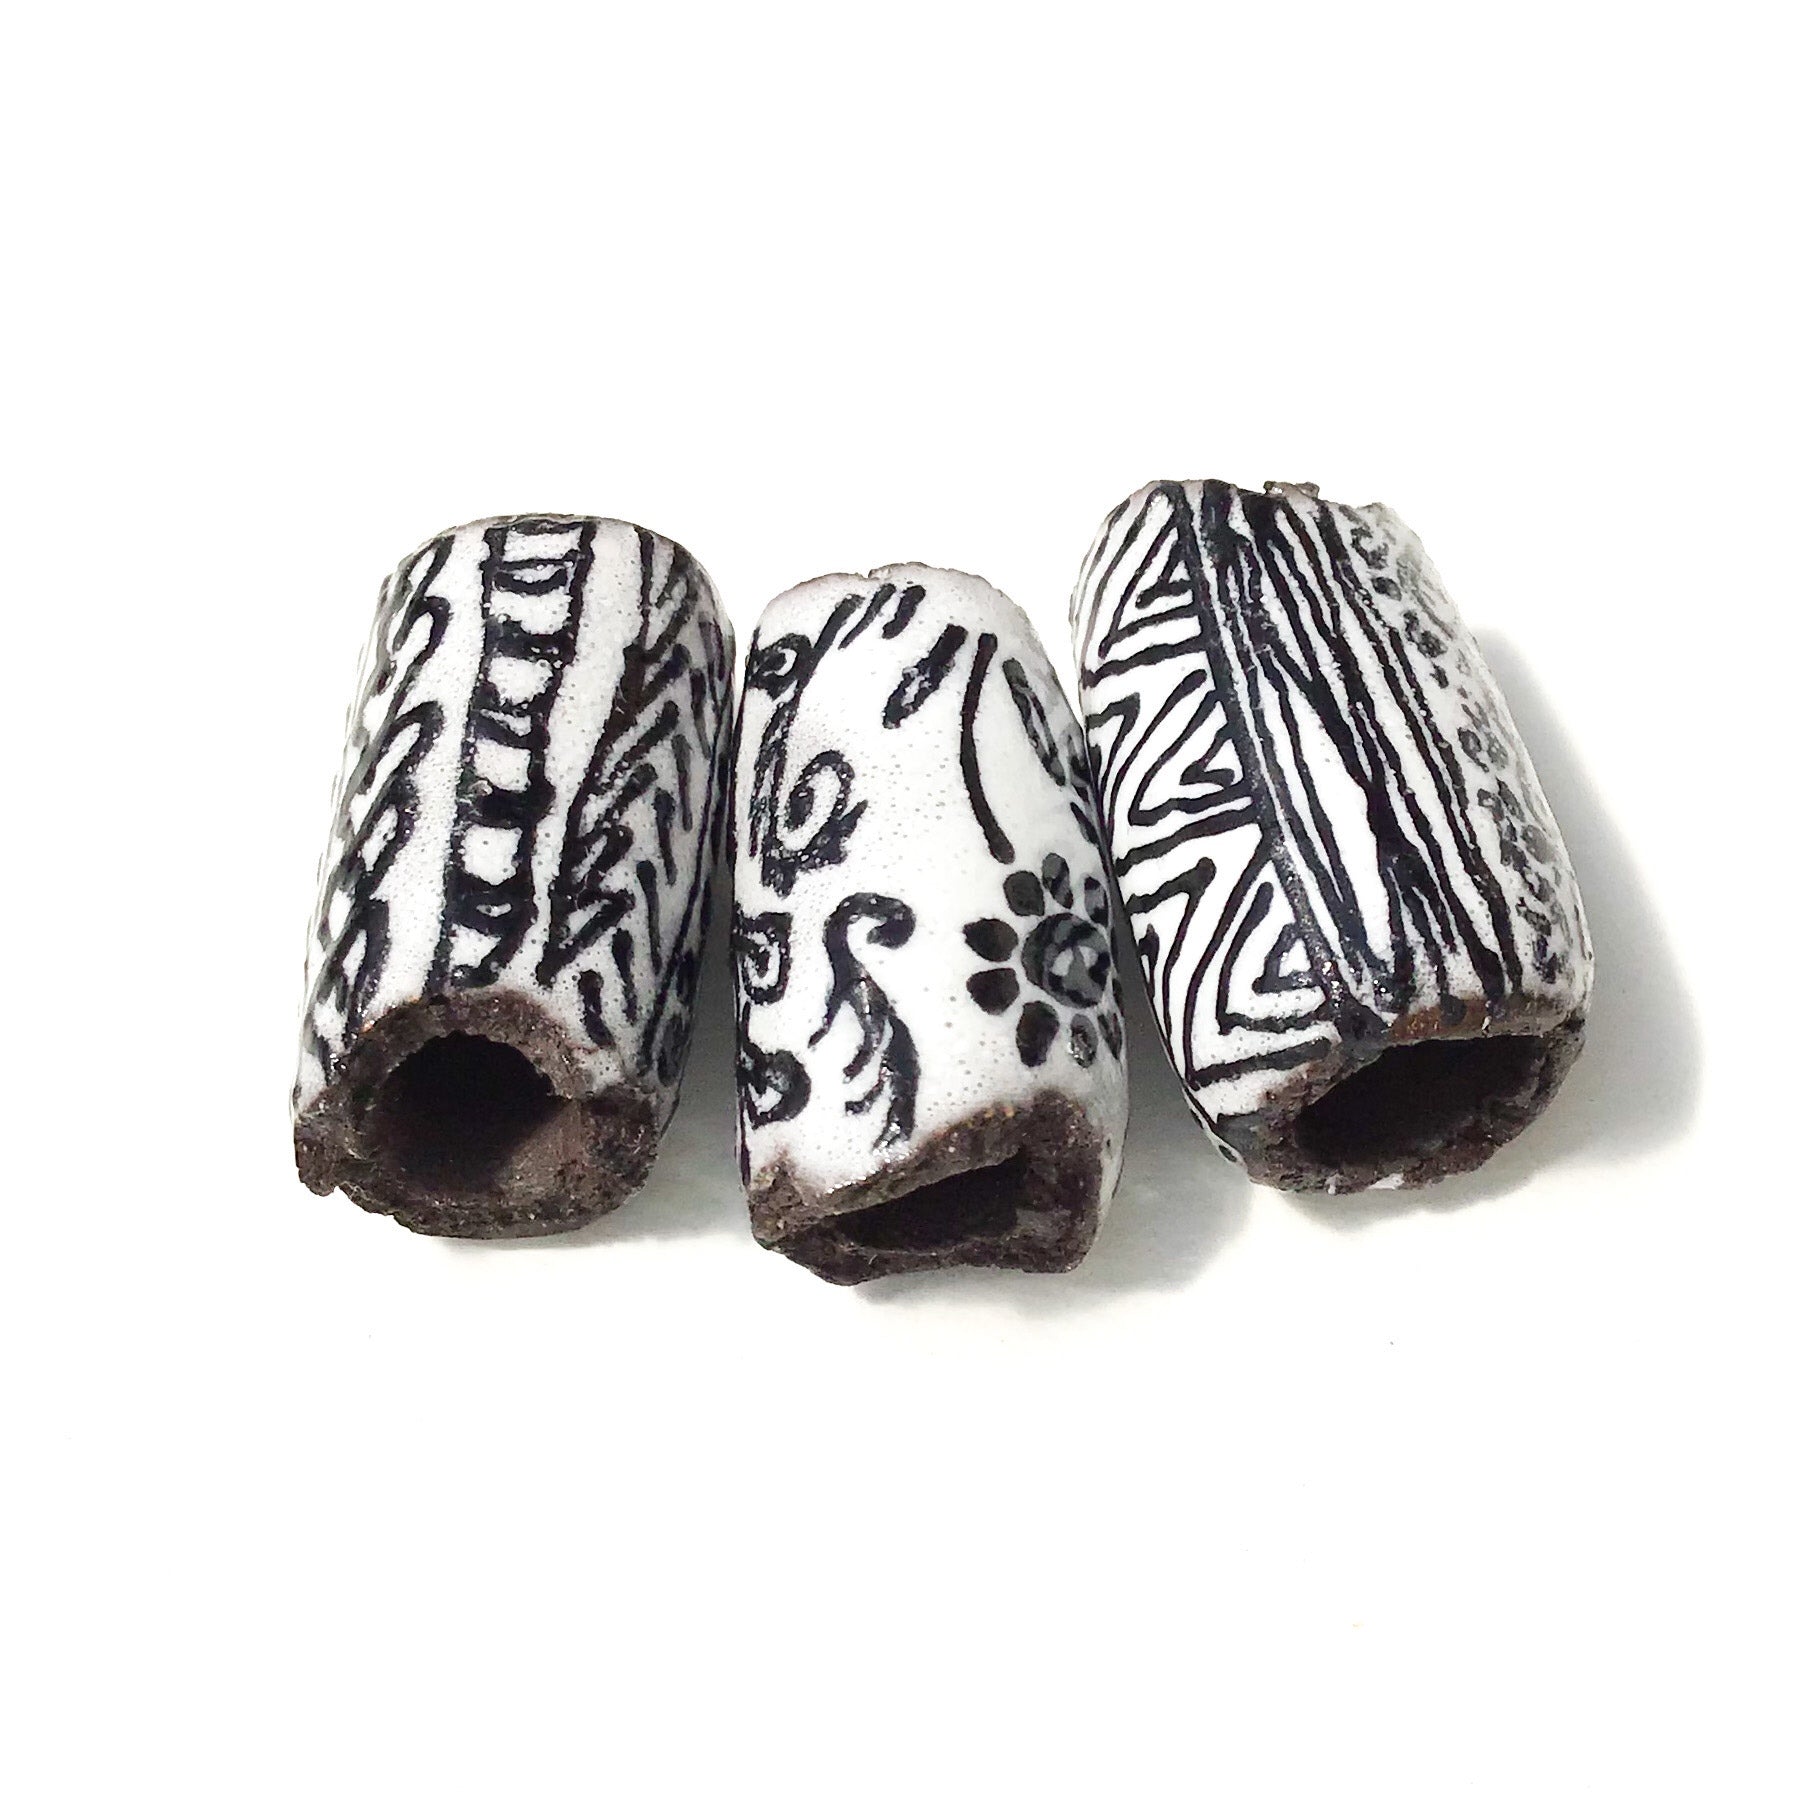 Black Clay Beads with Handpainted Detail - Black and White Beads